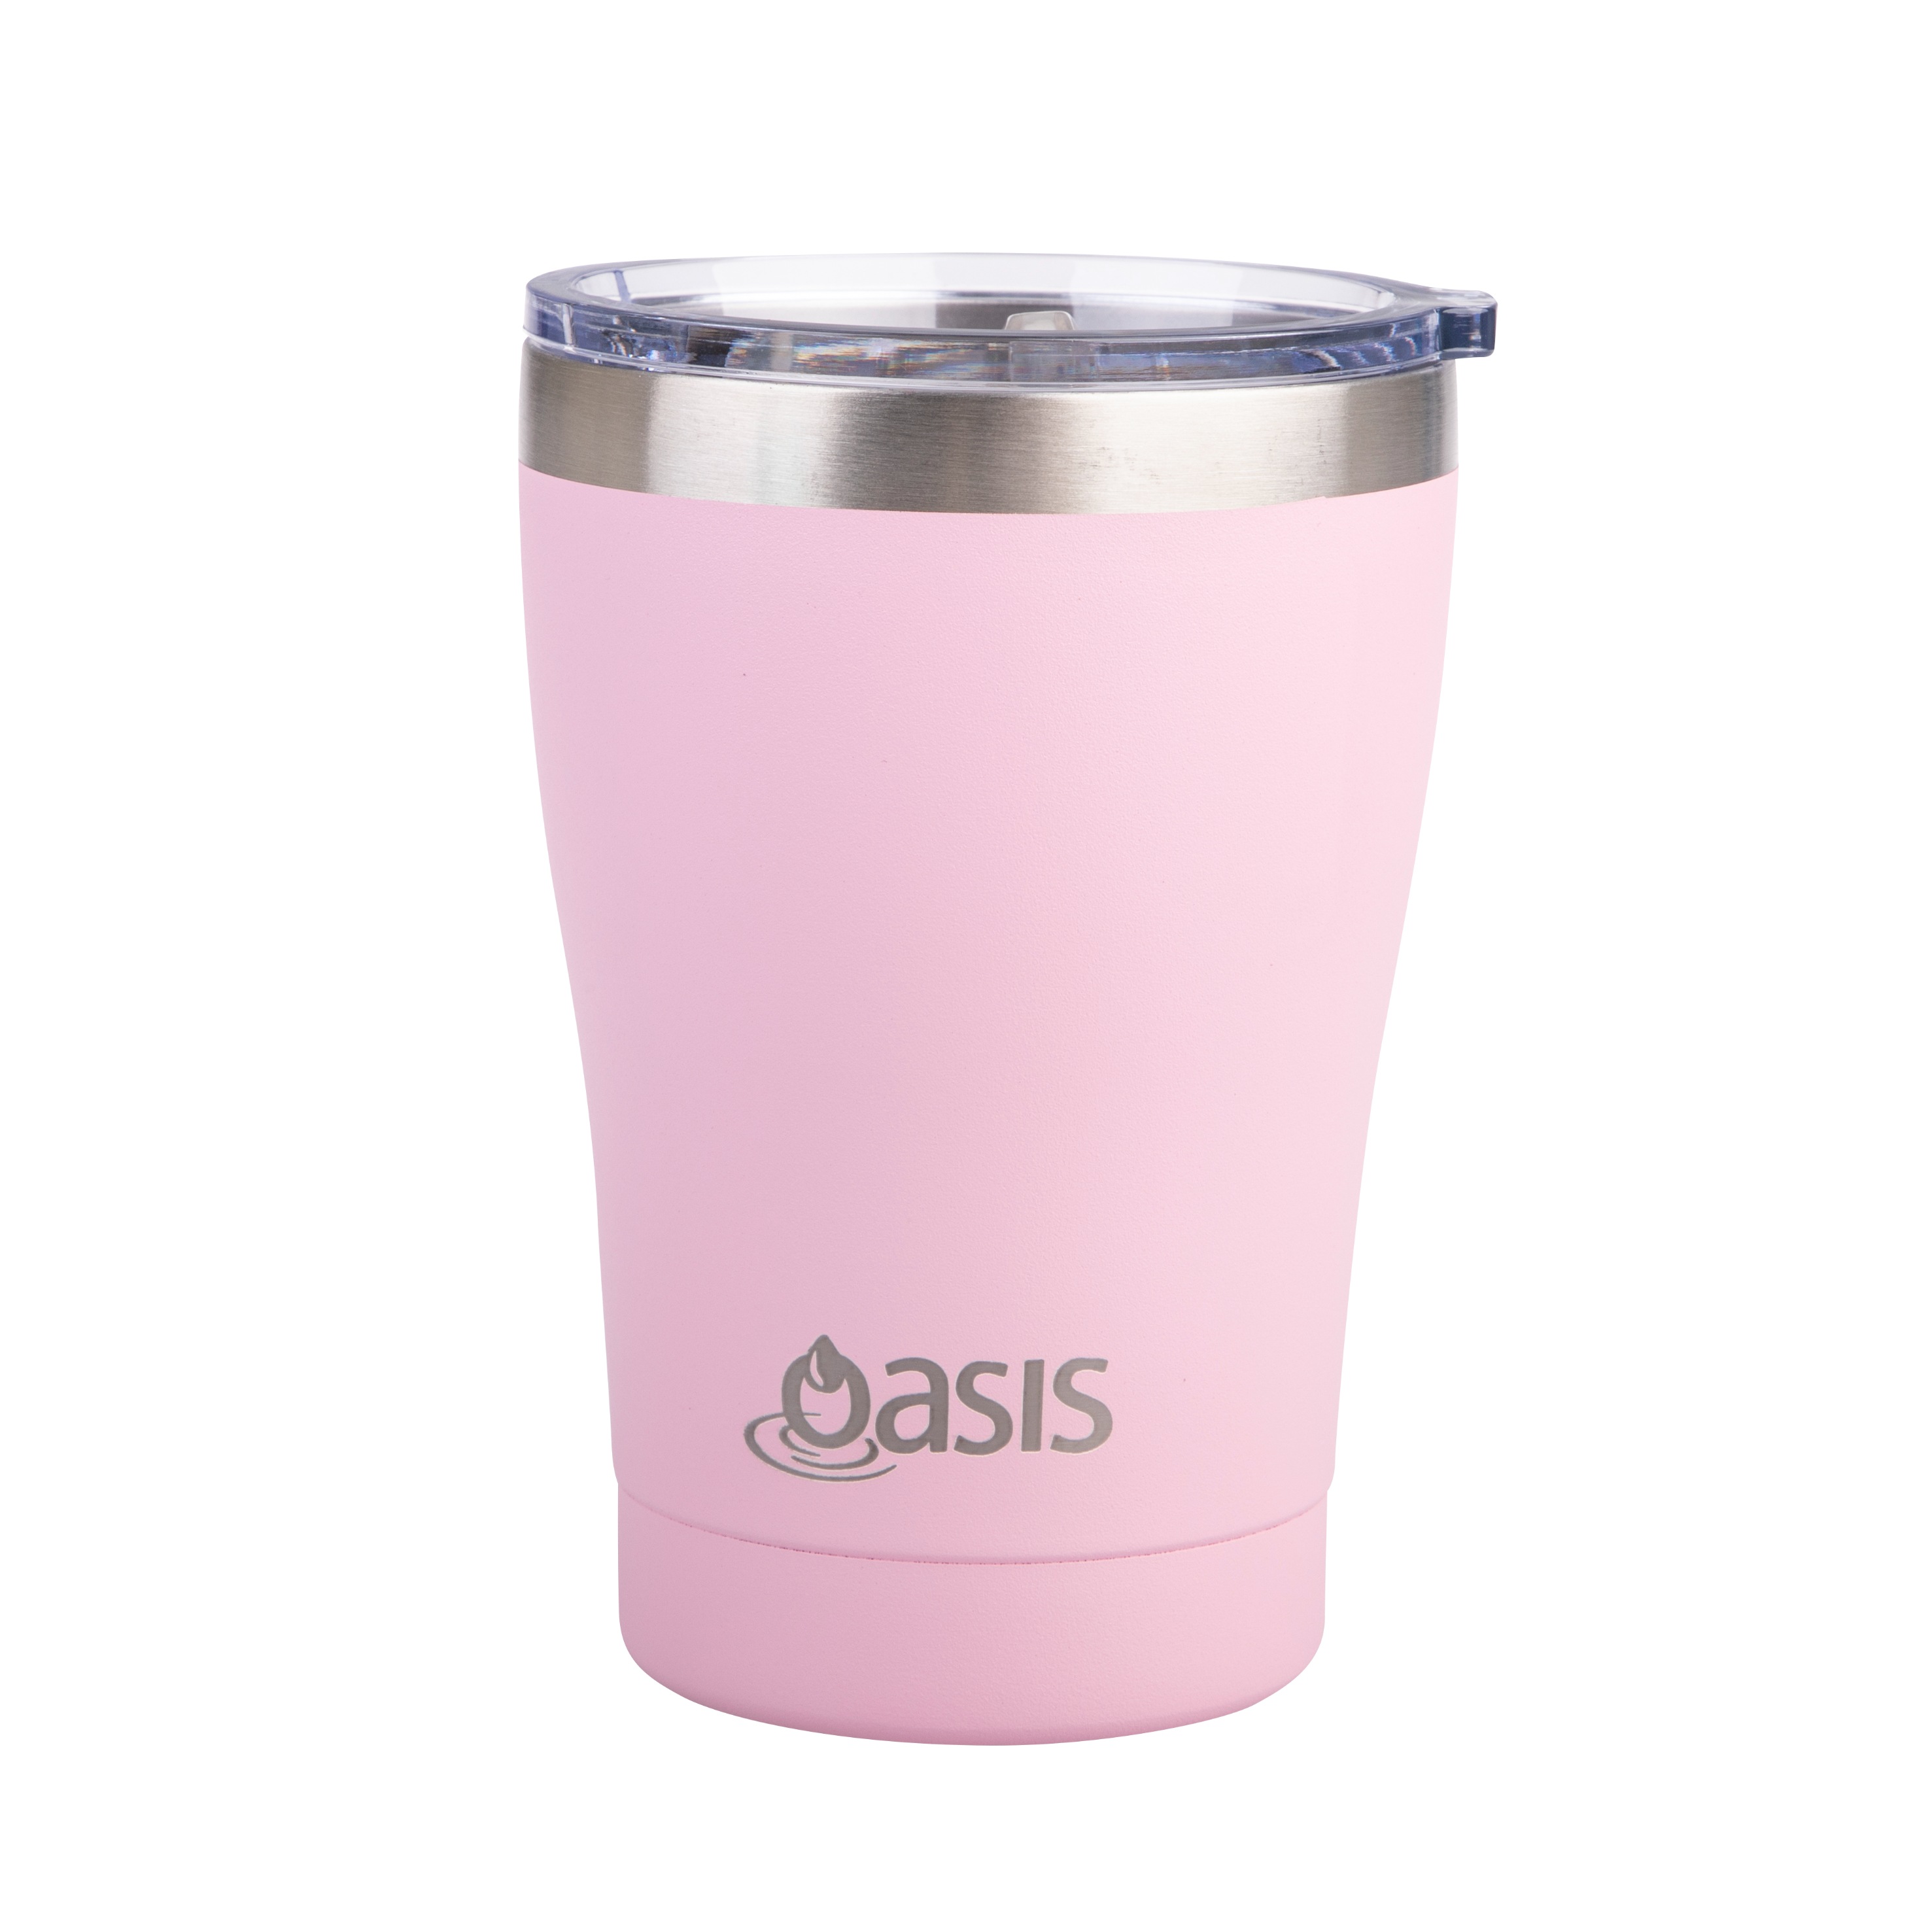 Oasis Stainless Steel Double Wall Insulated Travel Mug 350ml Carnation